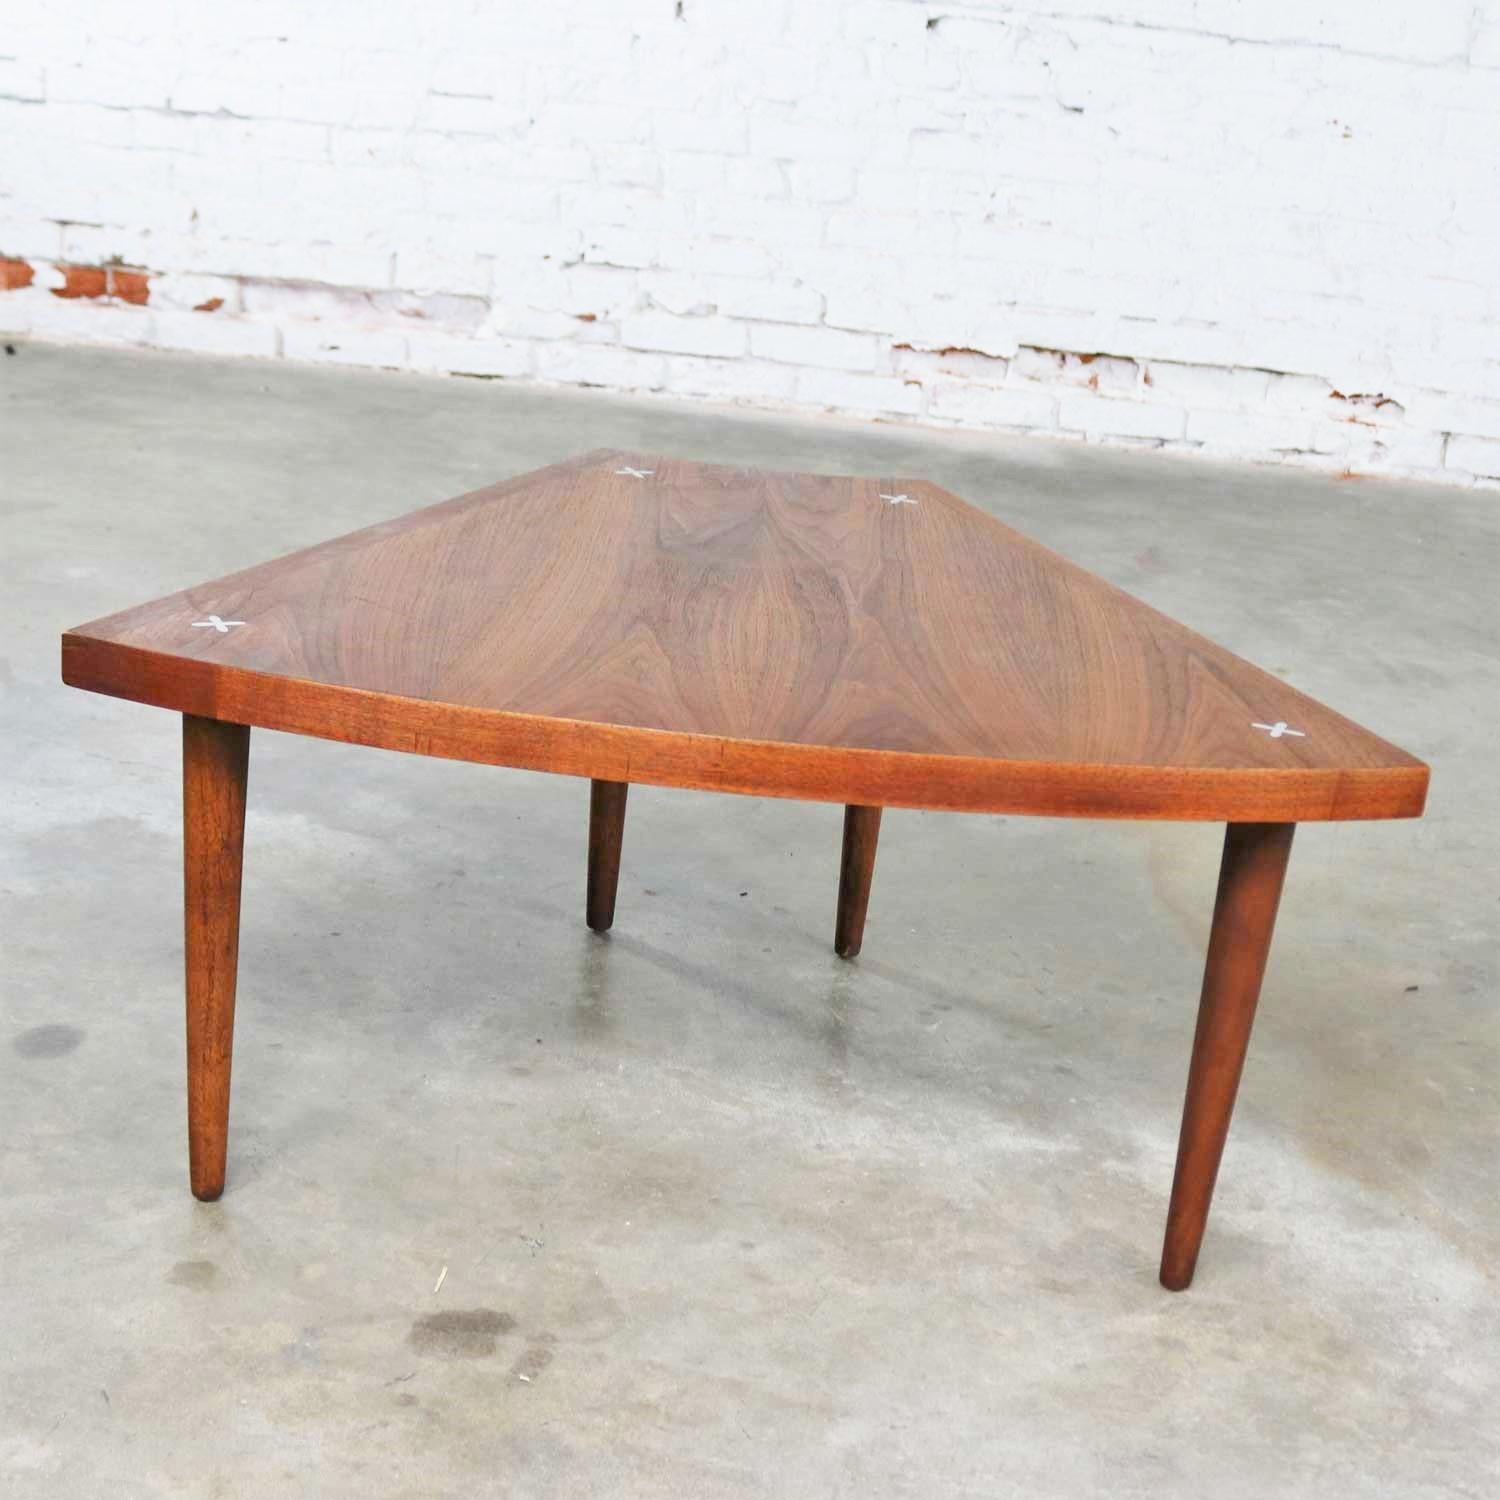 Inlay Walnut Wedge Shape End Table Attributed to Merton Gershun for American of Martin